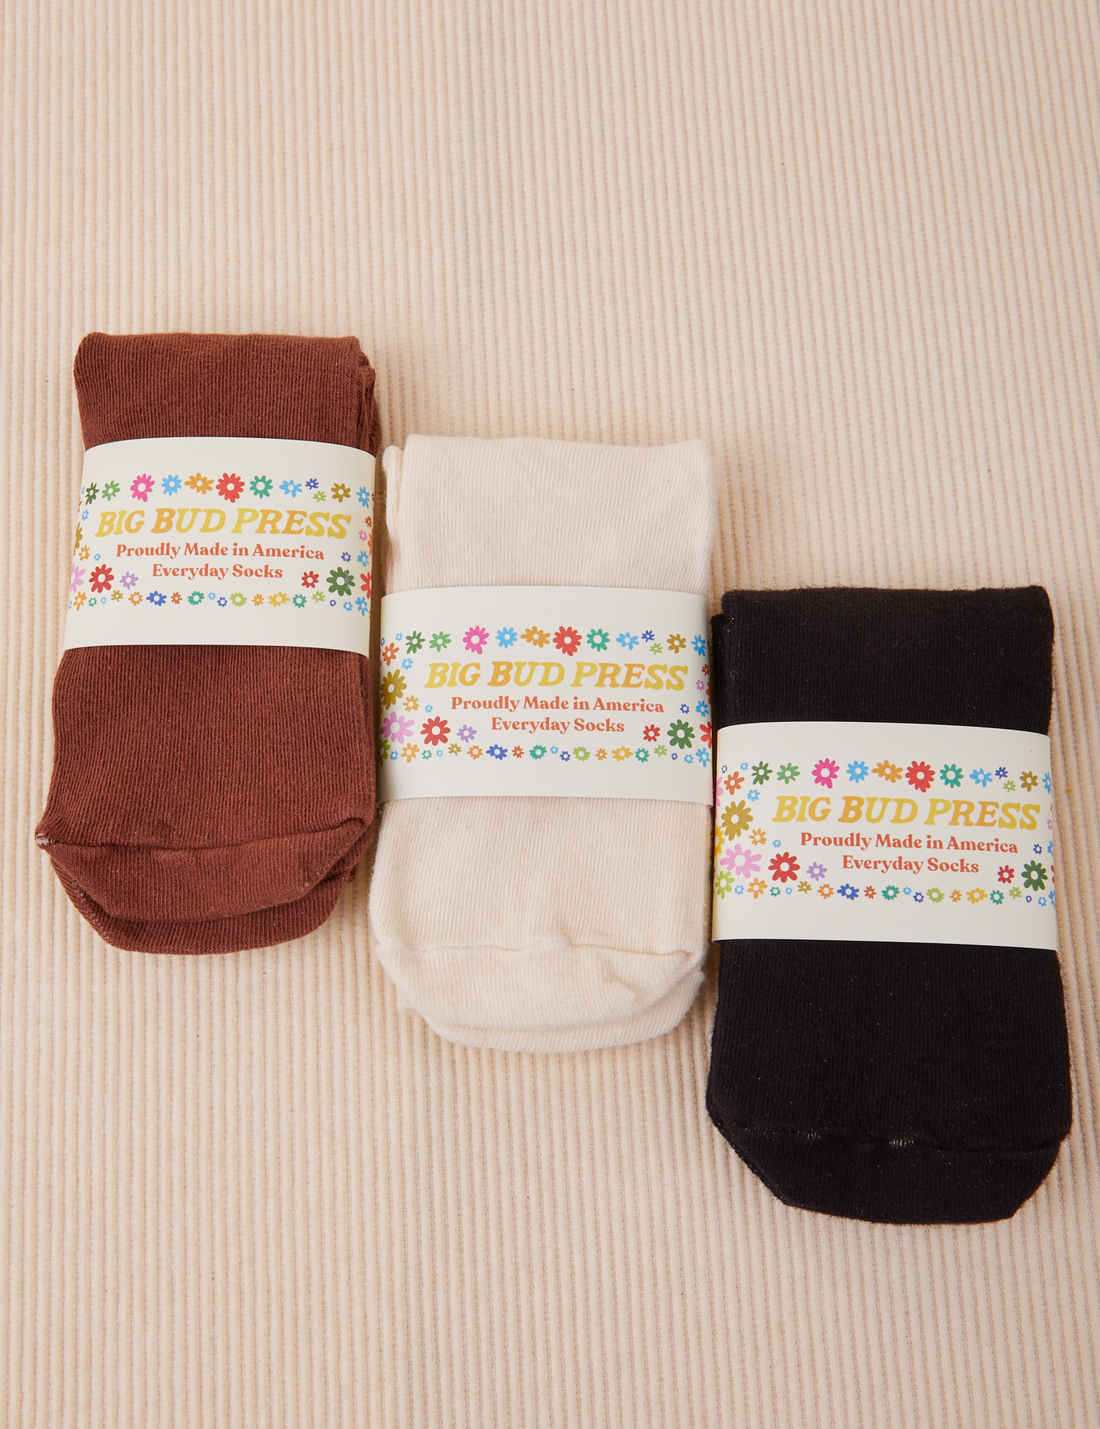 Everyday Sock in Fudgesicle Brown, Vintage Tee White and Basic Black with packaging